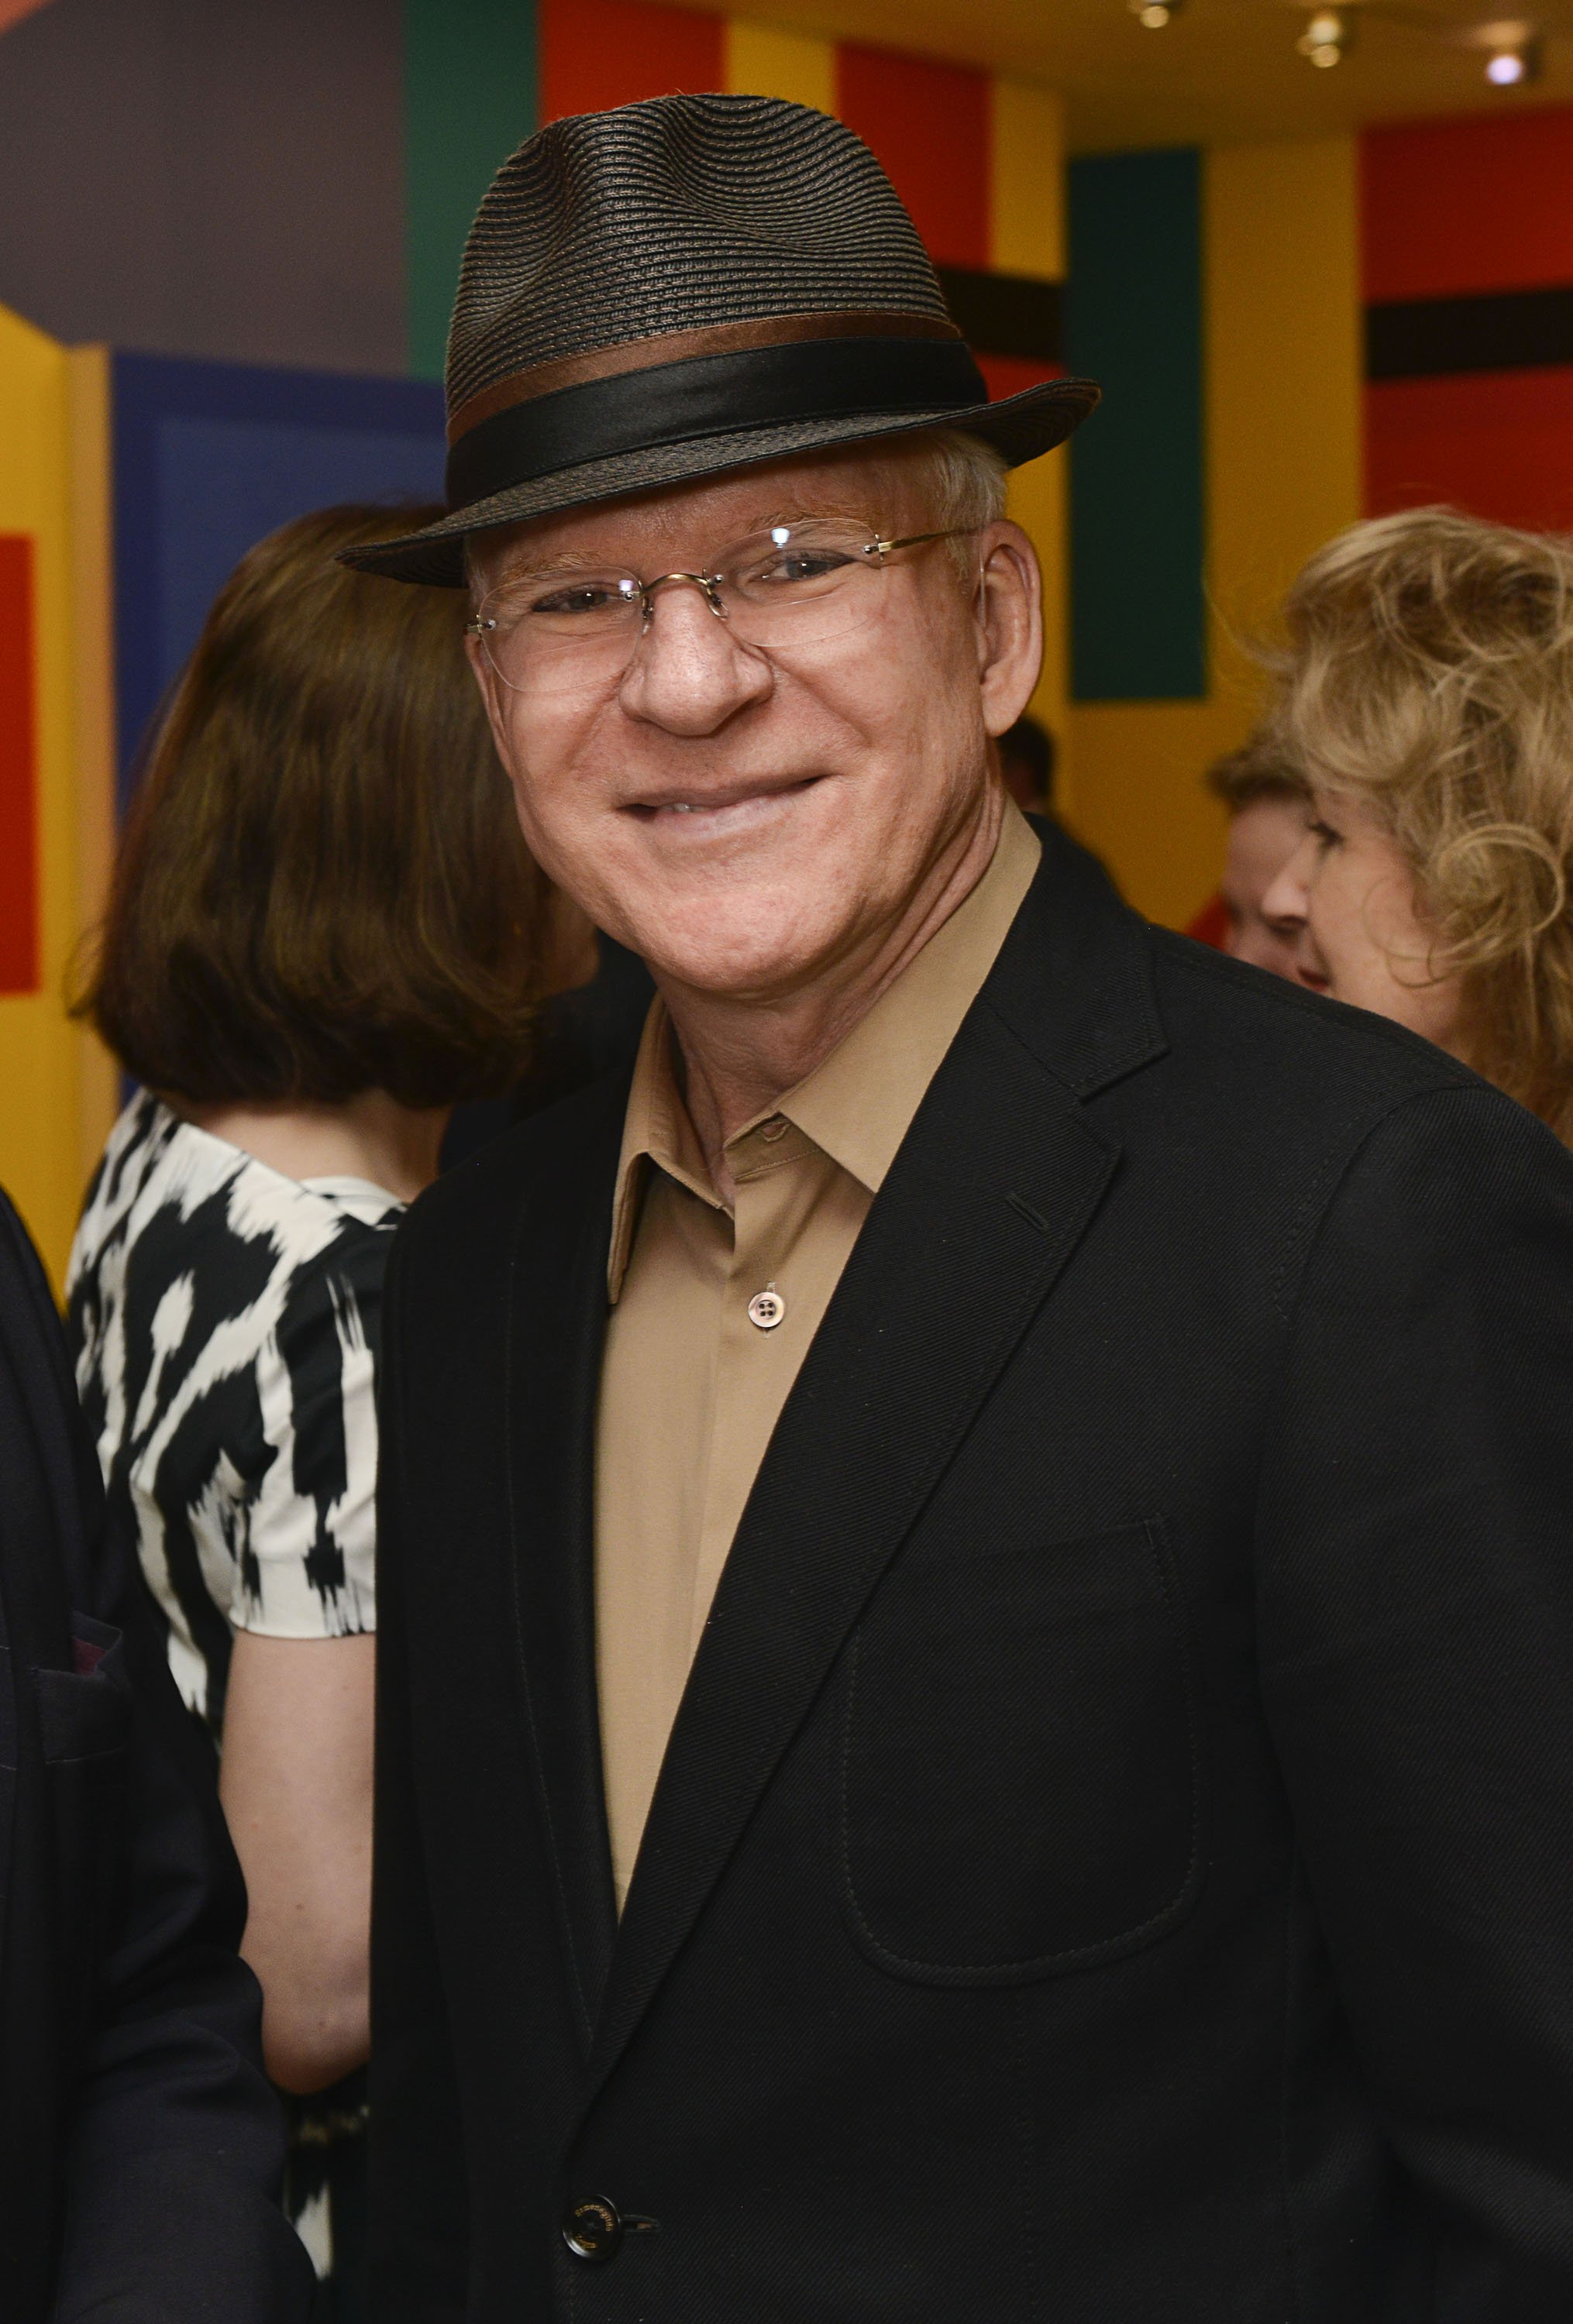 Steve Martin at Eric Fischl's "Bad Boy" book launch and celebration on May 14, 2013, in New York City | Source: Getty Images